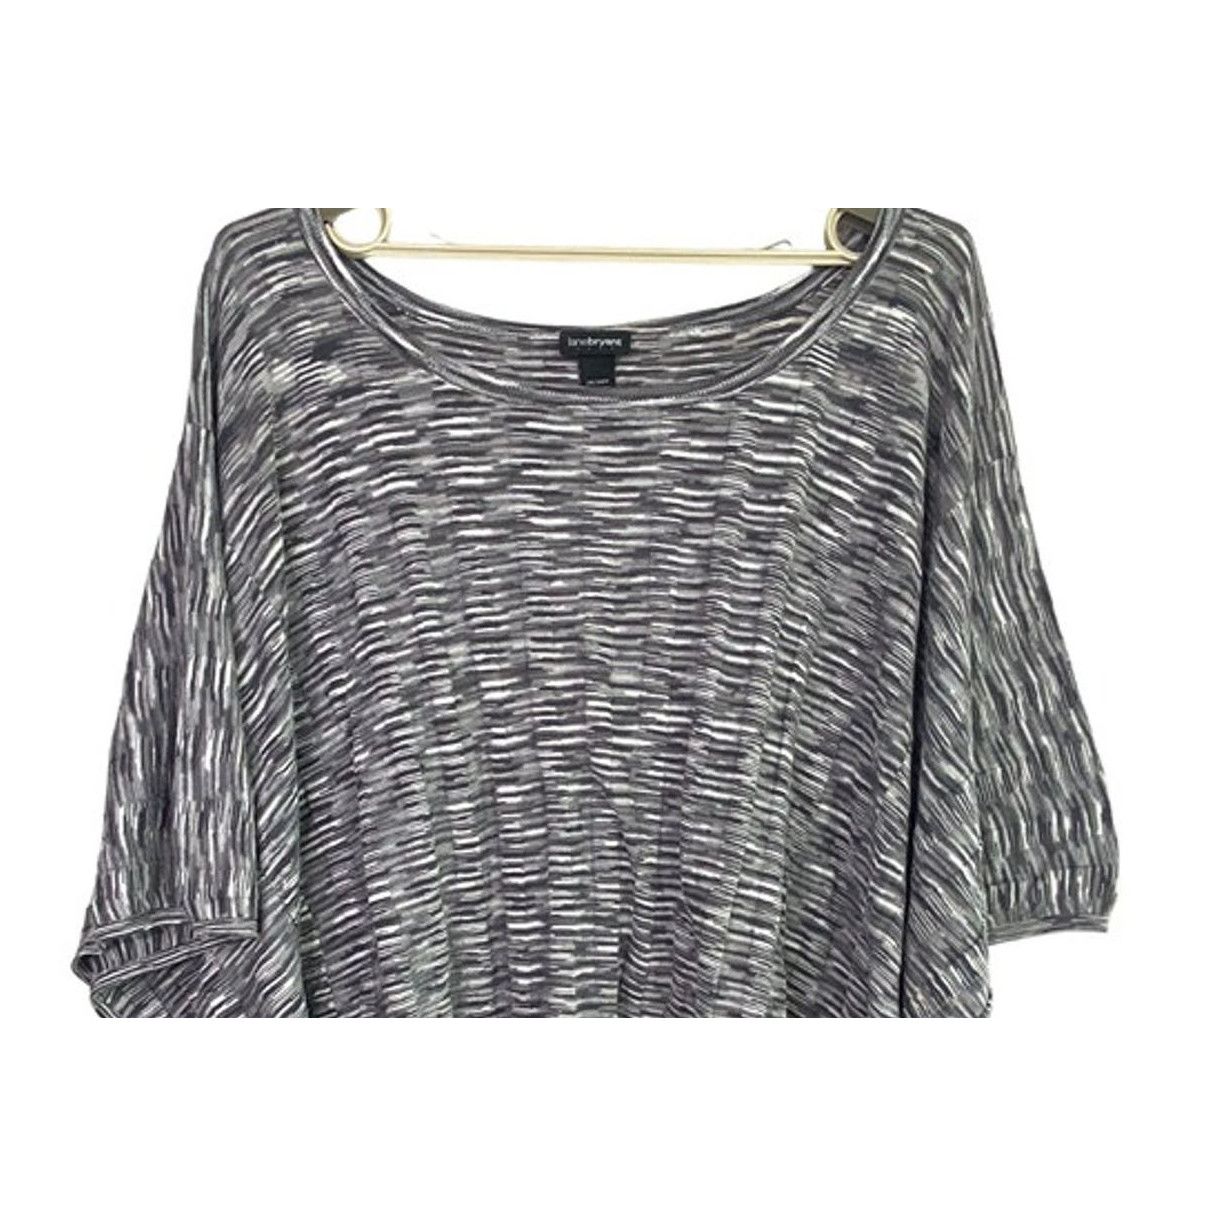 Other Lane Bryant Oversized Blouse Lightweight 26 28 Grey Black Size 4XL / US 24-26 - 2 Preview